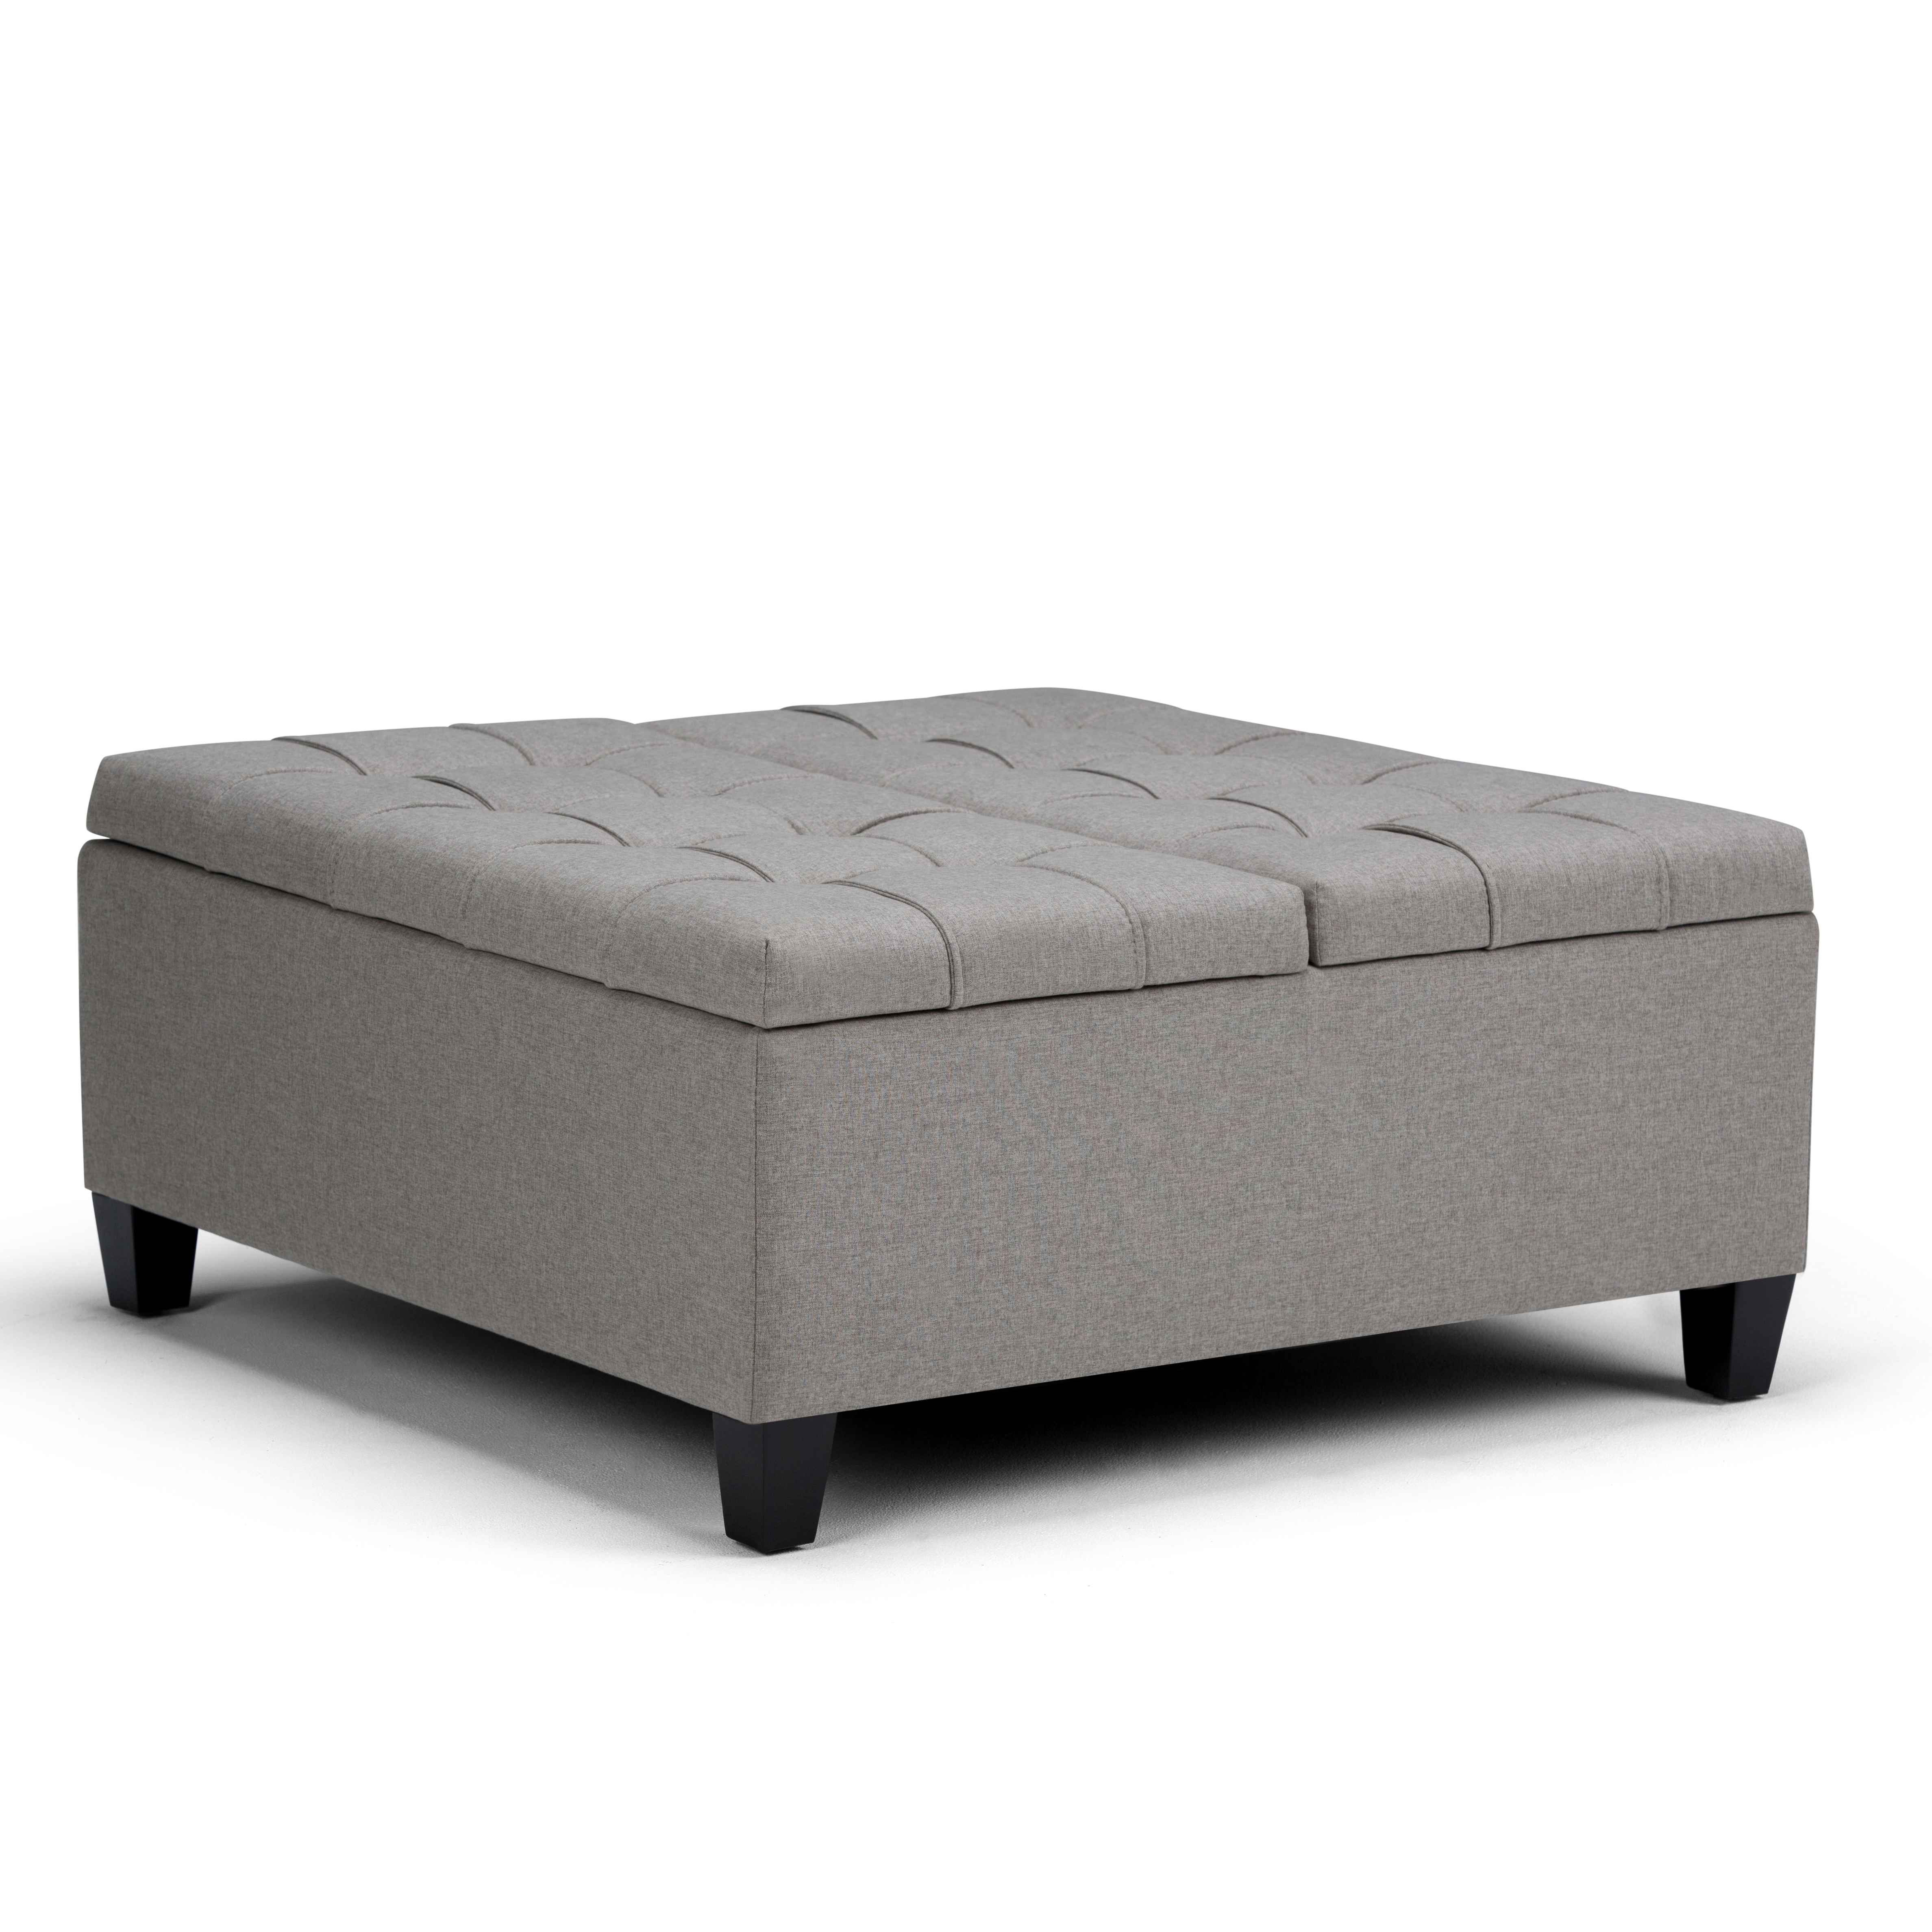 Simpli Home Harrison 36 inch Wide Transitional Square Coffee Table Storage Ottoman in Dove Grey Linen Look Fabric